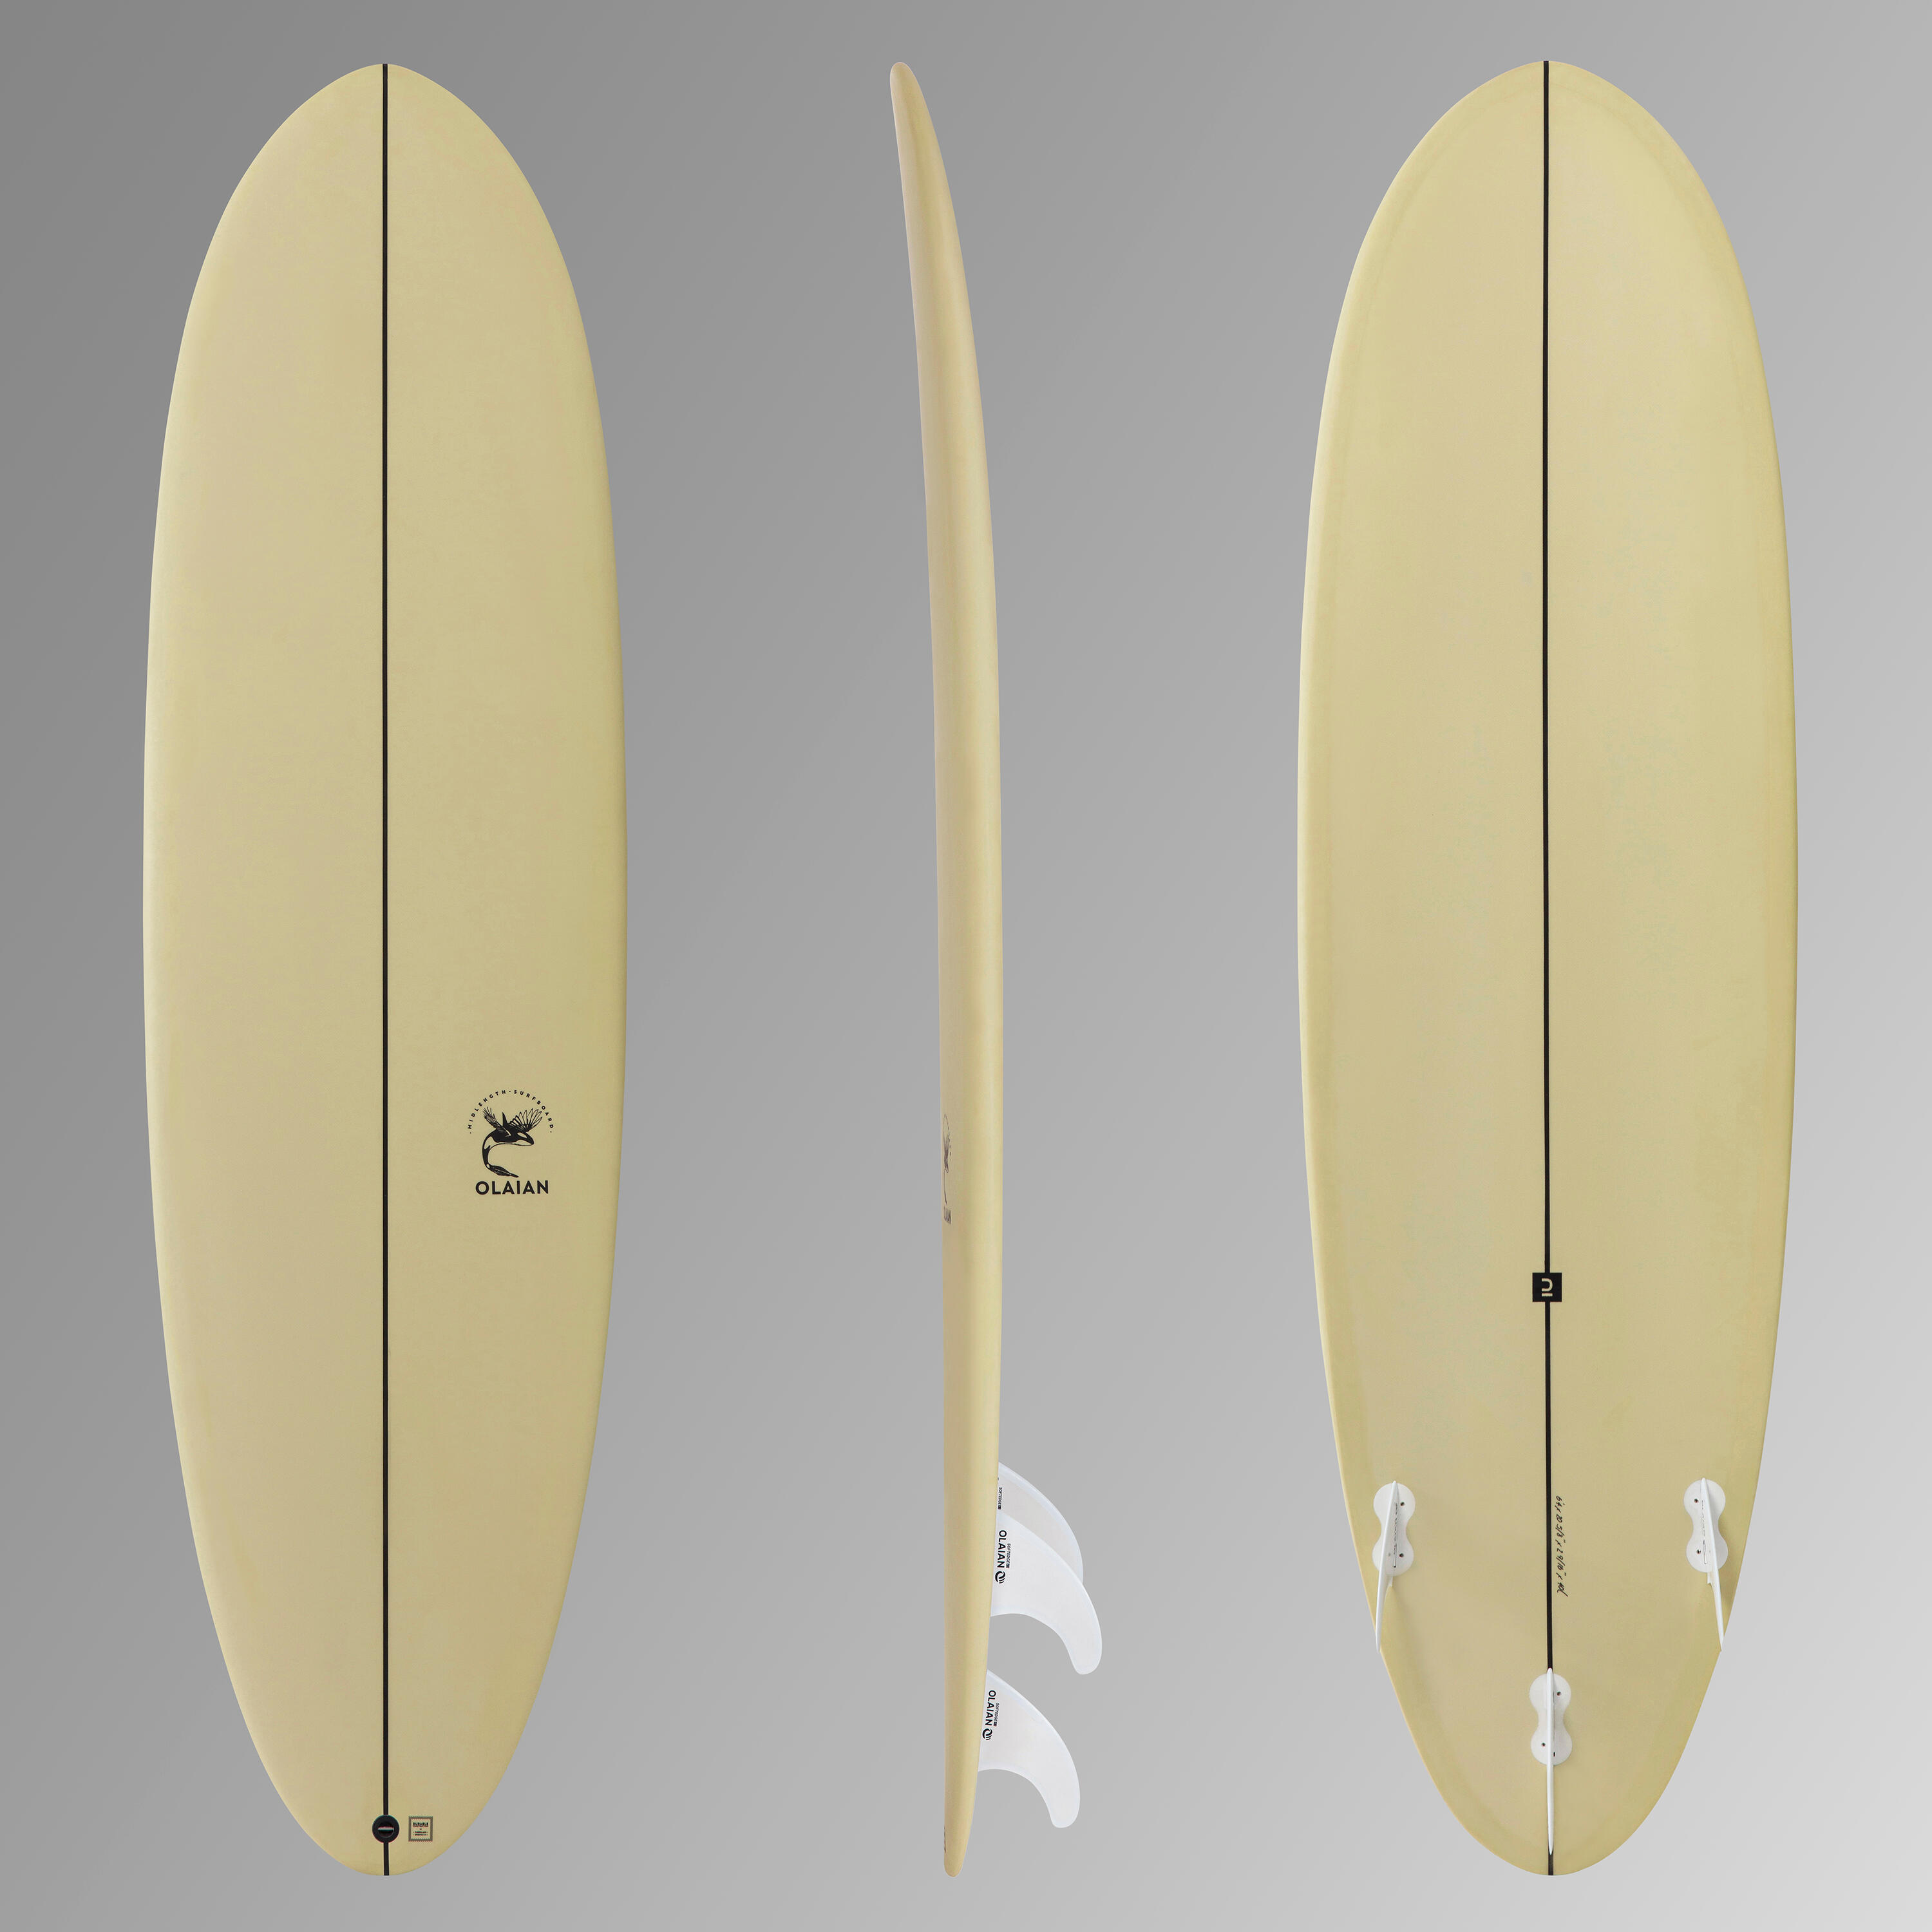 SURF 500 Hybrid 6'4", complete with 3 fins. 1/14